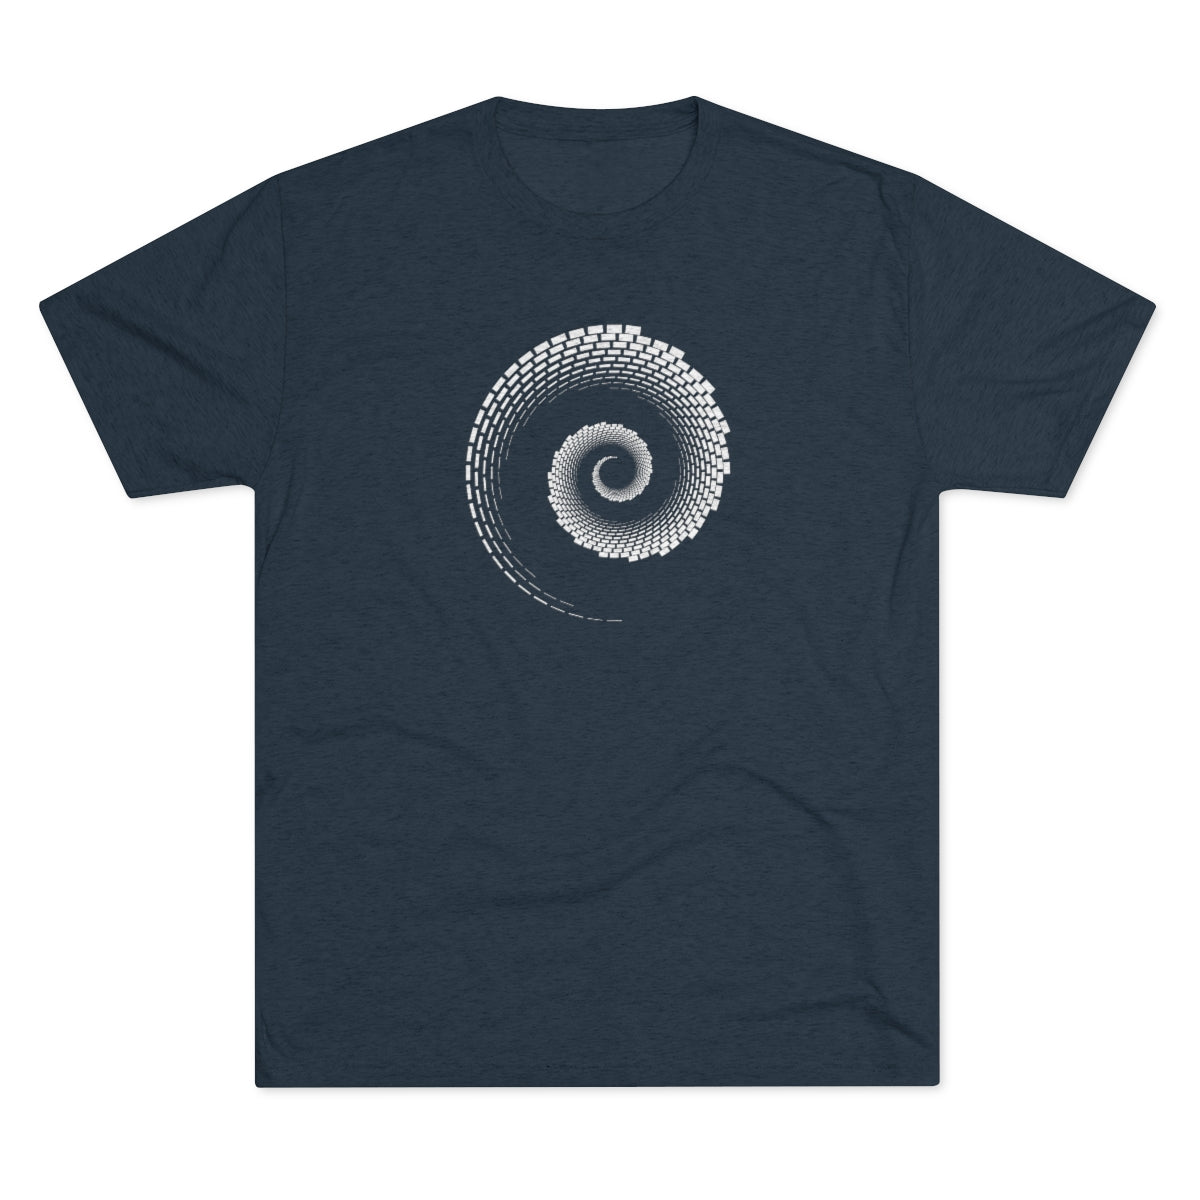 Special Collection – Centric – Spiral Galaxy: Unisex Tri-Blend Crew Tee